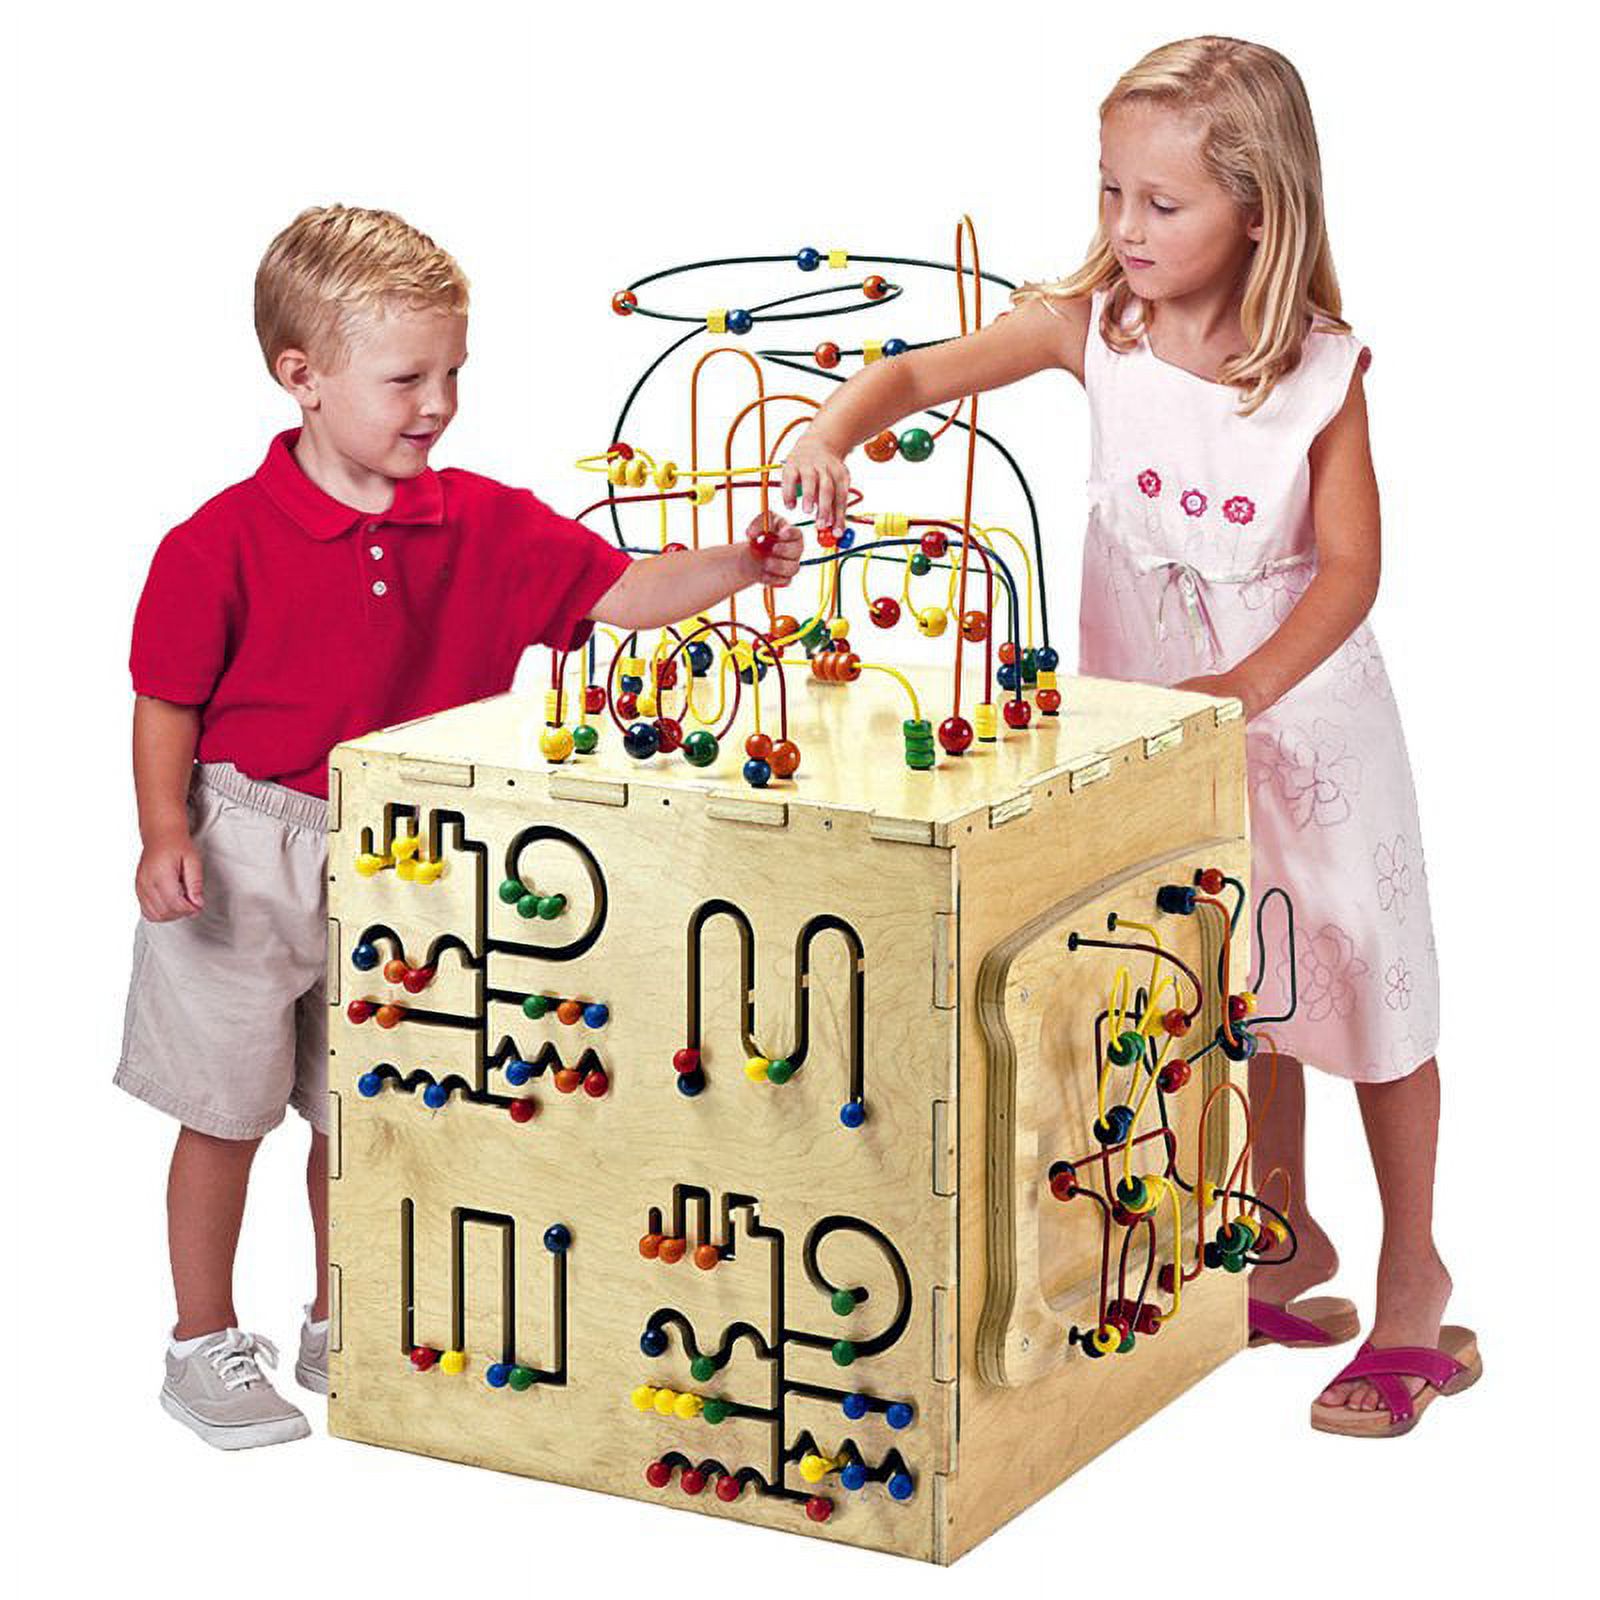 Anatex Play Cube Activity Center - image 1 of 2